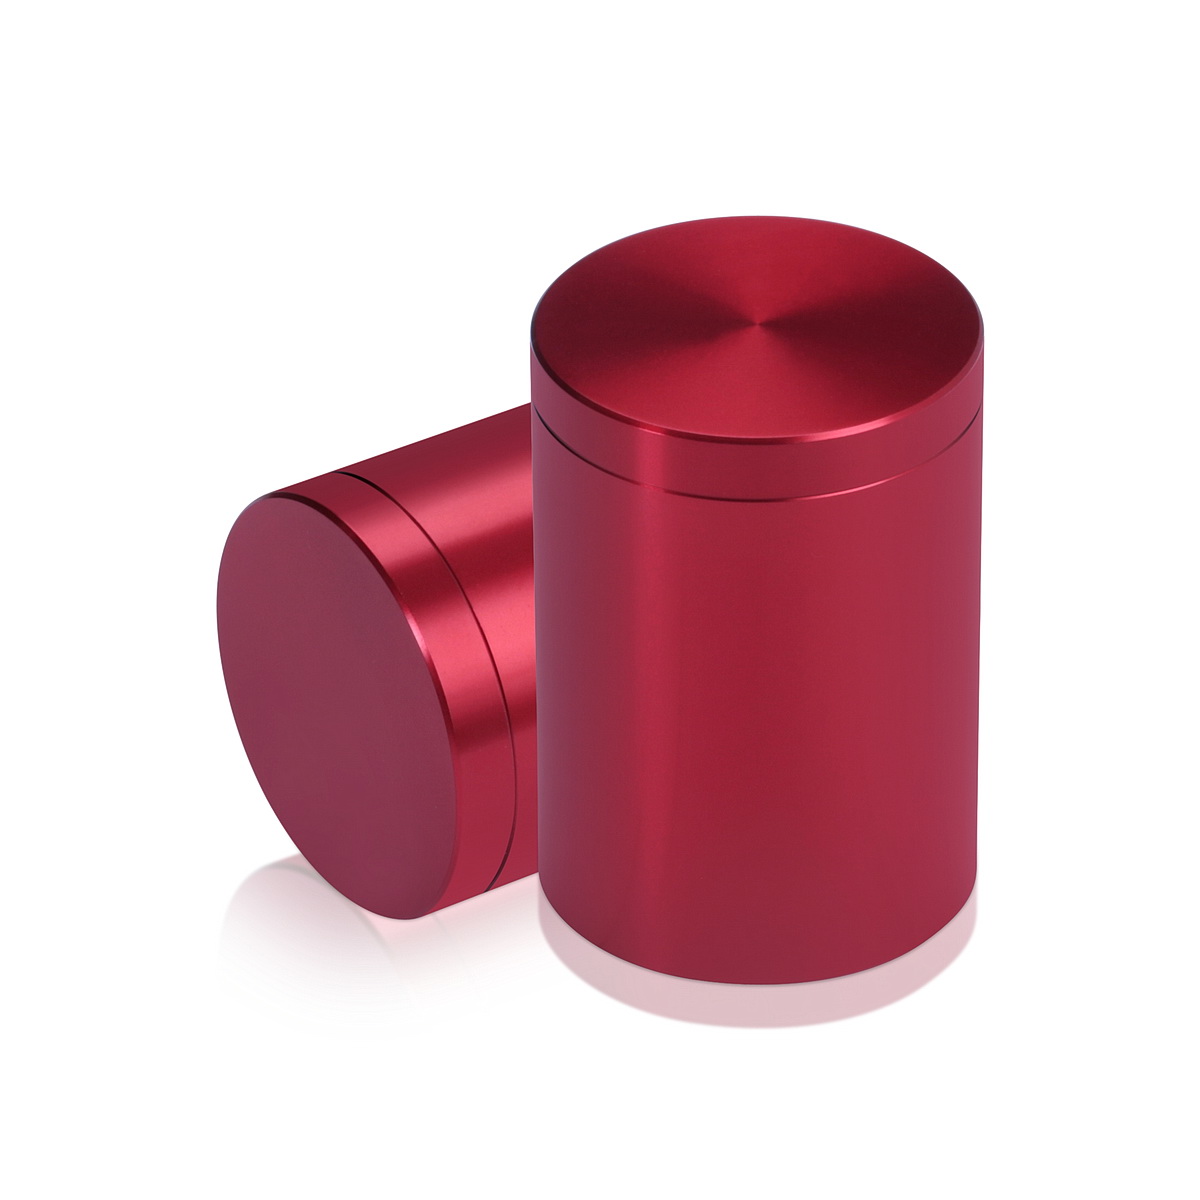 1-1/4'' Diameter X 1-1/2'' Barrel Length, Affordable Aluminum Standoffs, Cherry Red Anodized Finish Easy Fasten Standoff (For Inside / Outside use) [Required Material Hole Size: 7/16'']